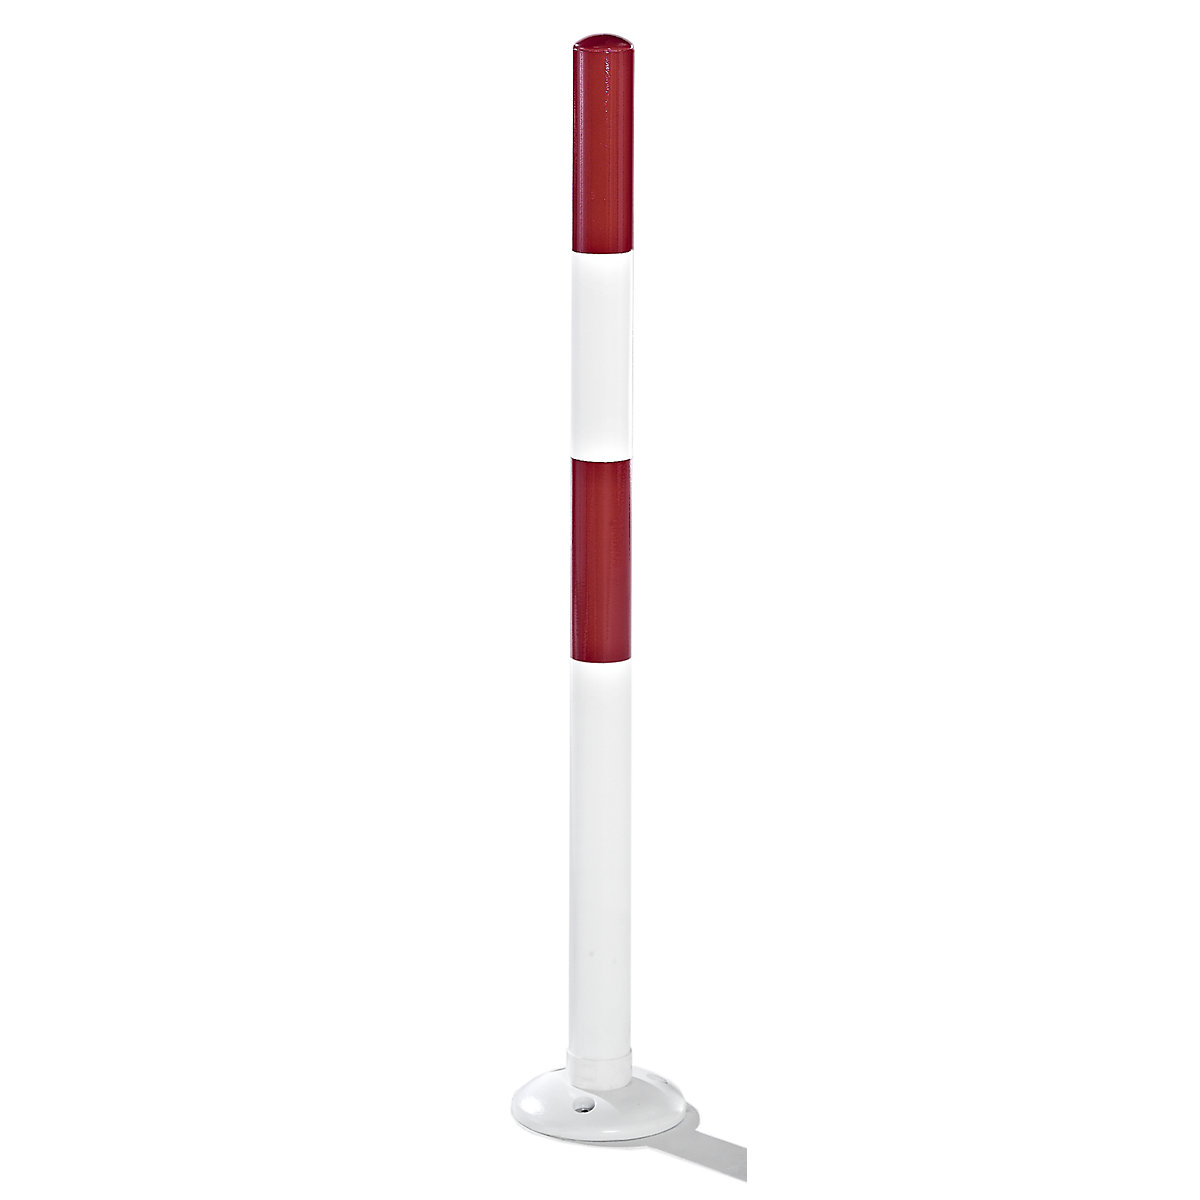 Barrier post made of round tubular steel, white/red, to bolt in place, Ø 76 mm-4